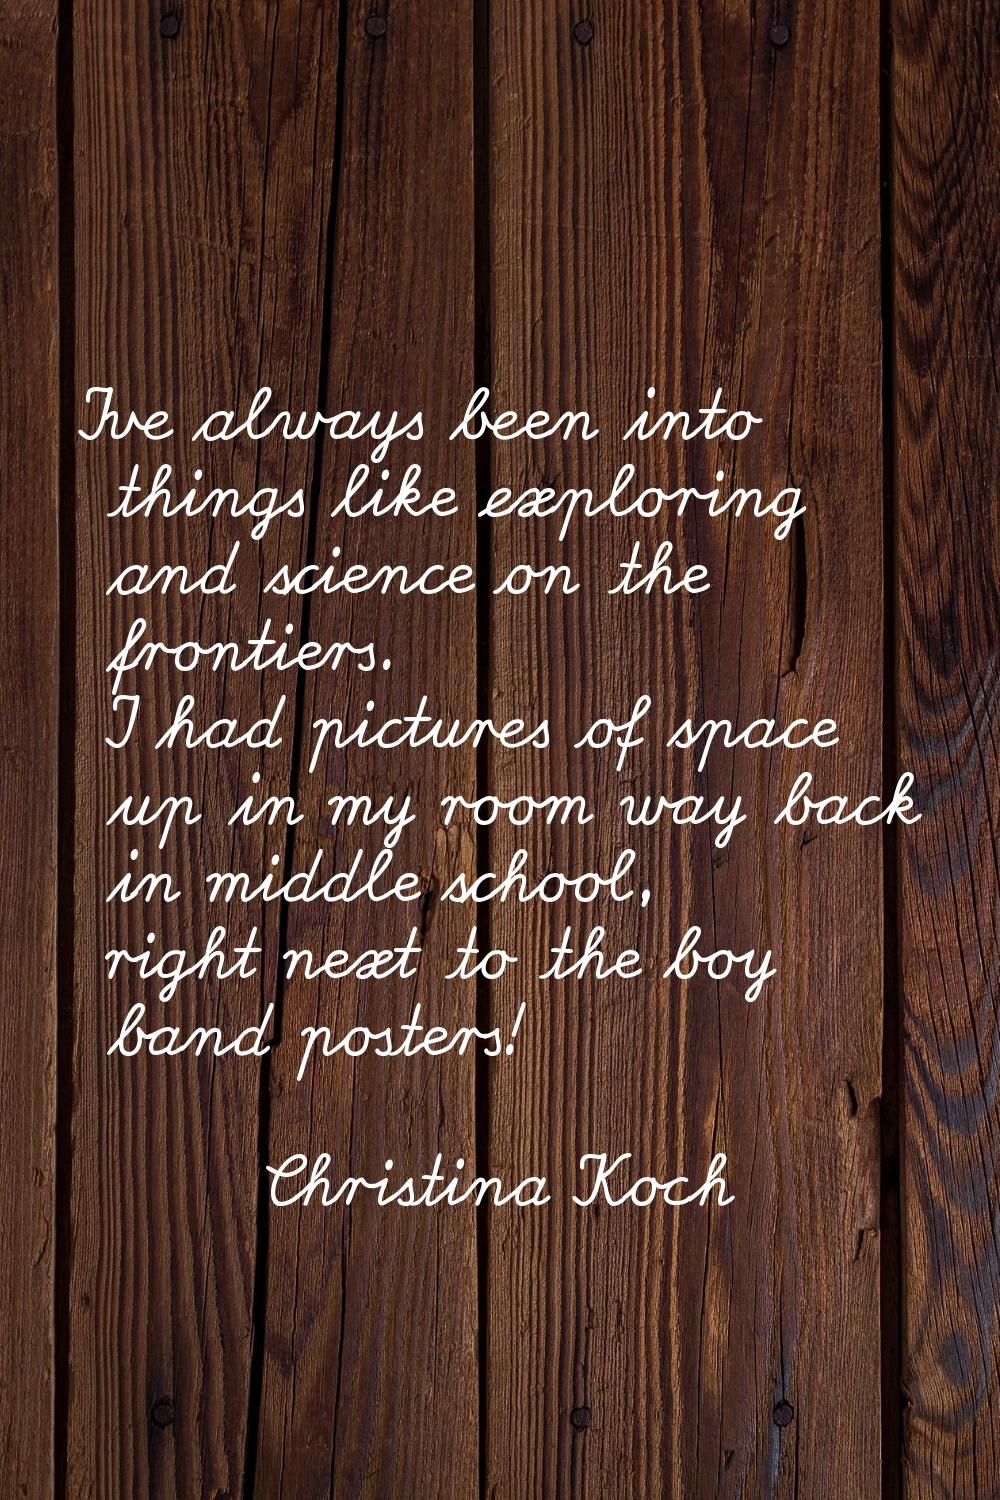 I've always been into things like exploring and science on the frontiers. I had pictures of space u